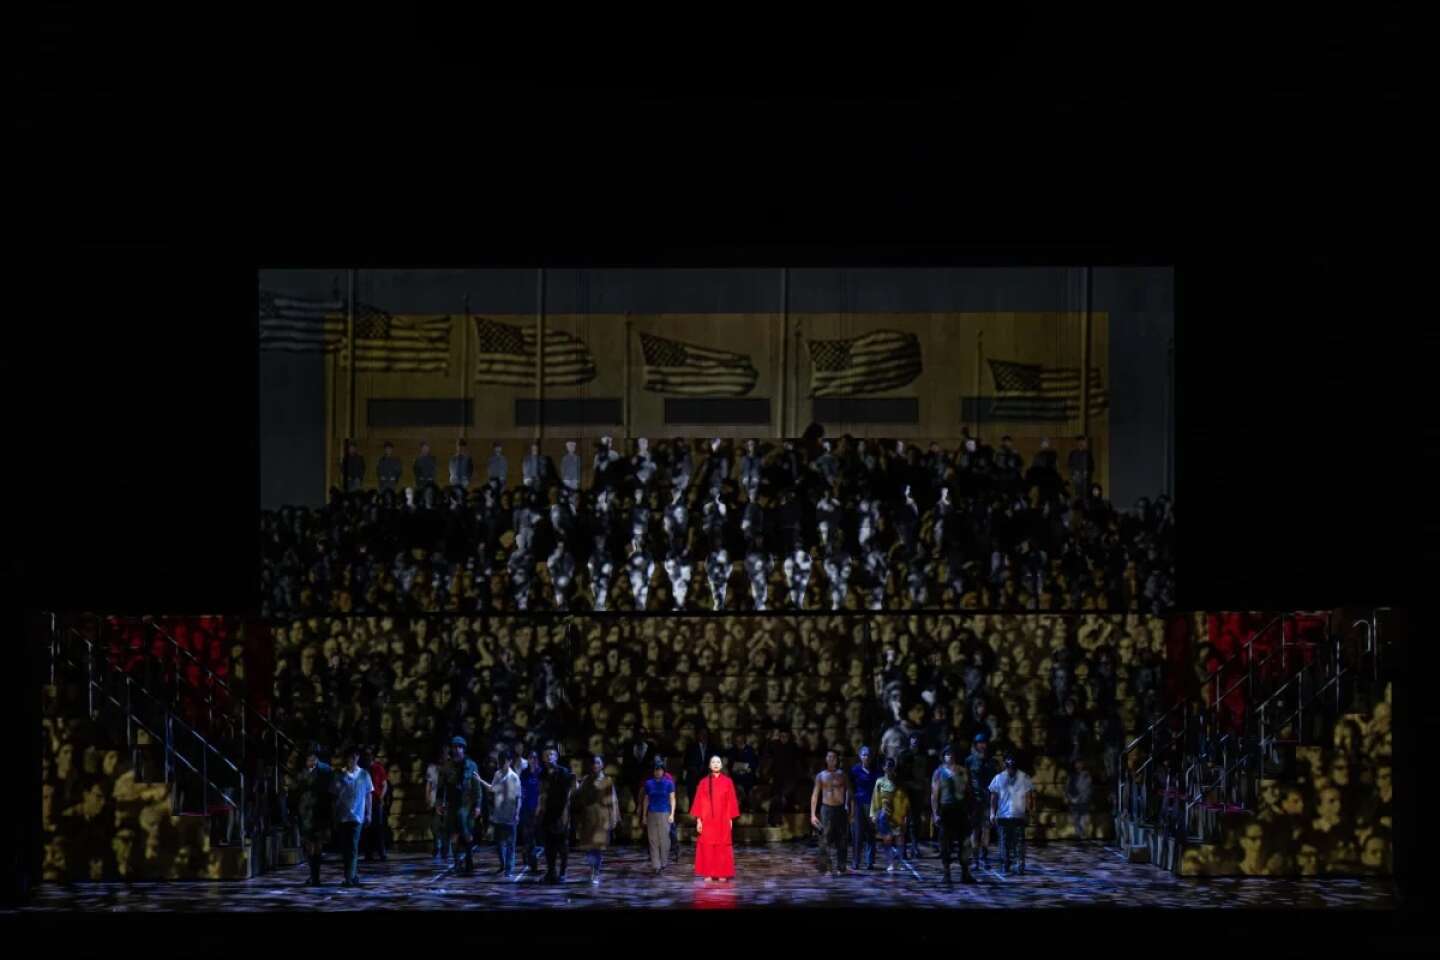 The fabulous reinterpretation of “Nixon in China” by Valentina Carrasco at the Opéra Bastille